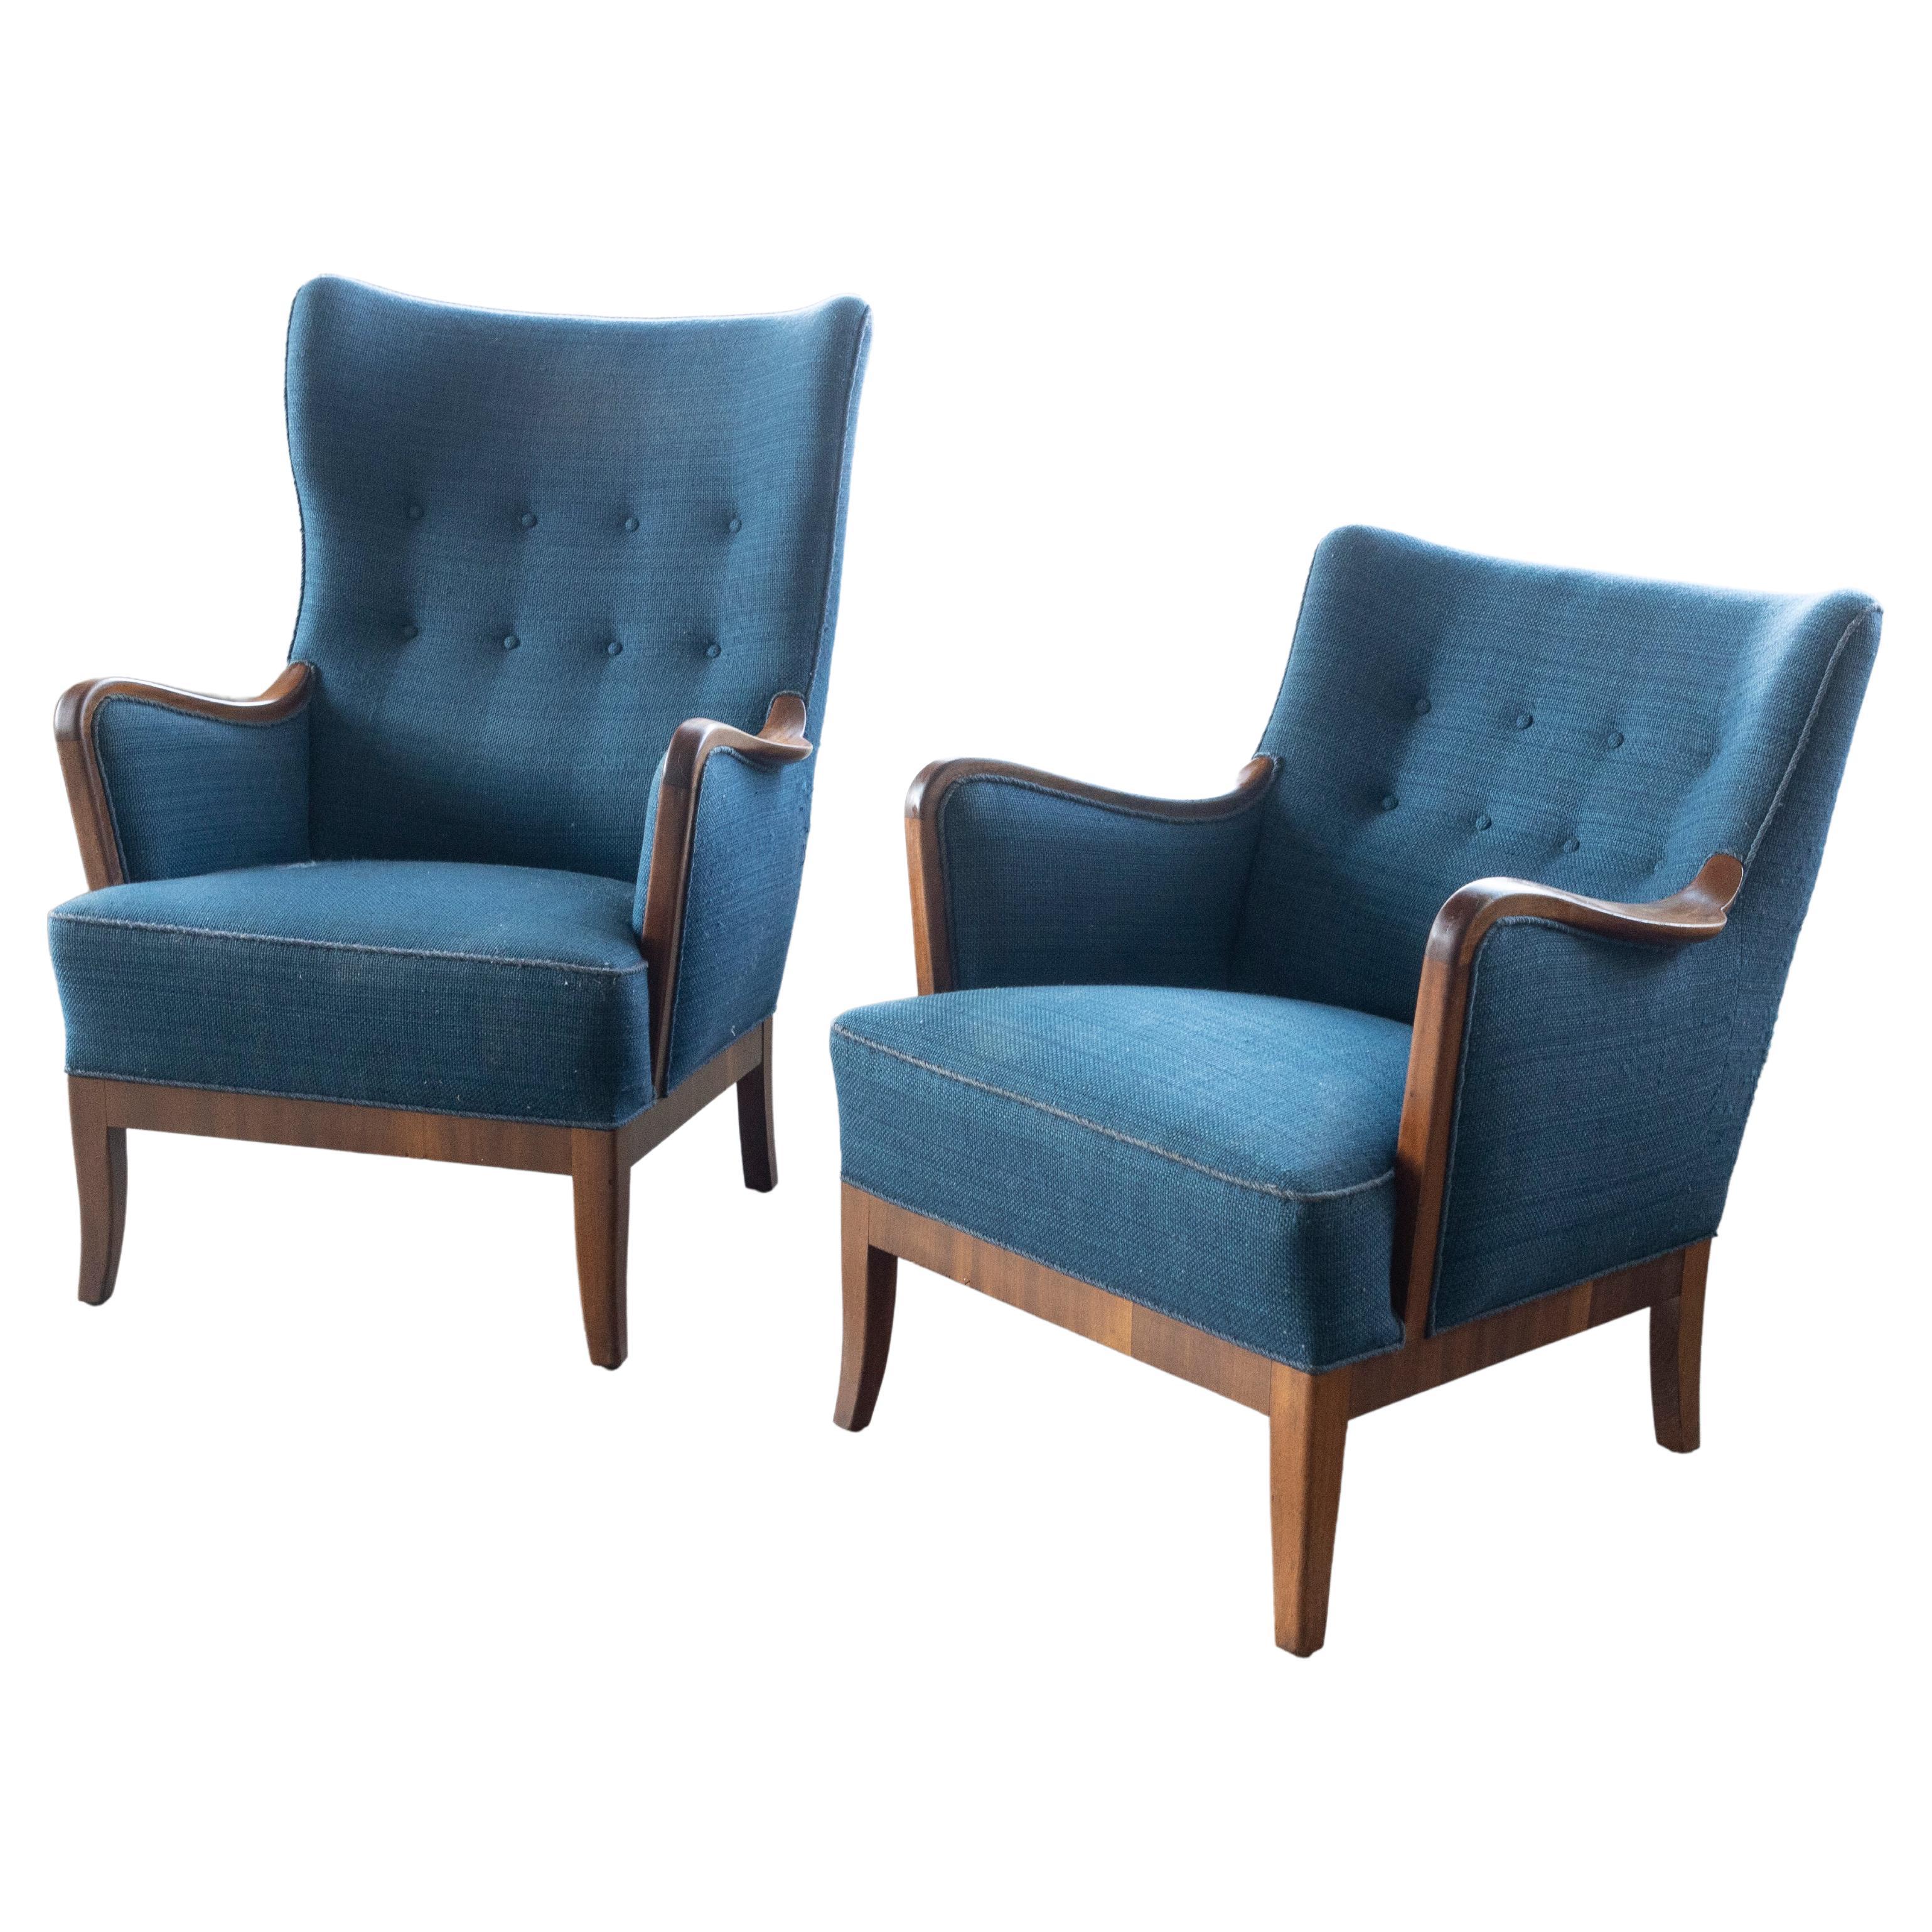 Pair of Danish Midcentury Lounge Chairs with Walnut Frames and Legs For Sale